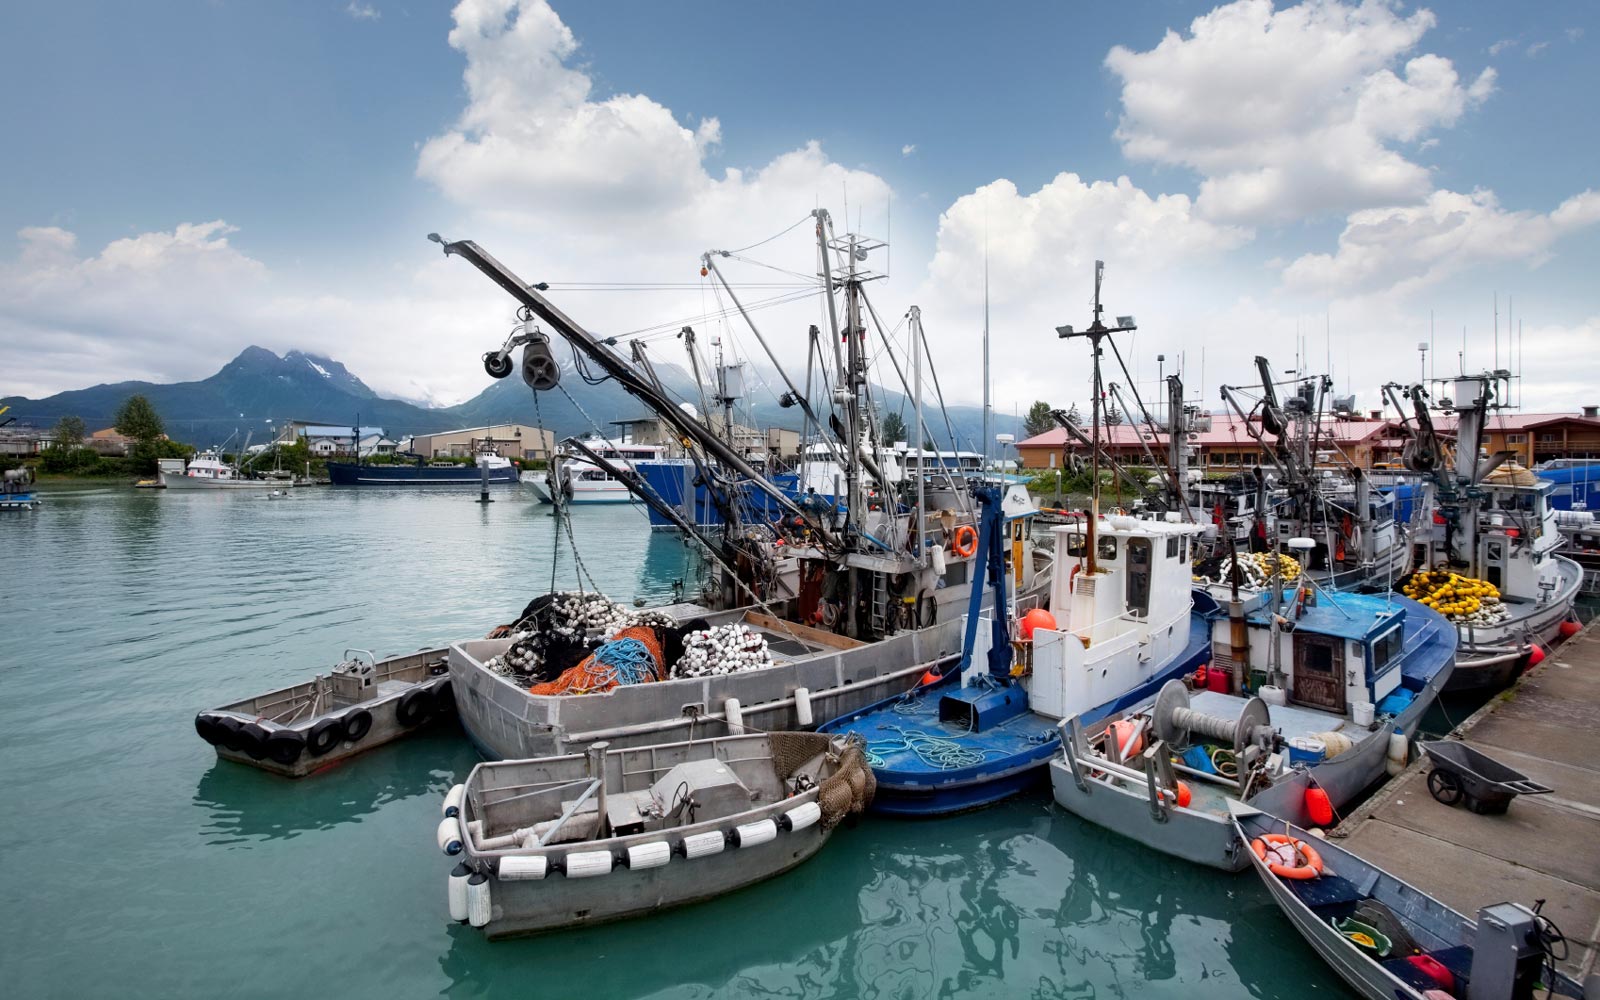 Commercial fishing boats moored in an Alaskan harbor